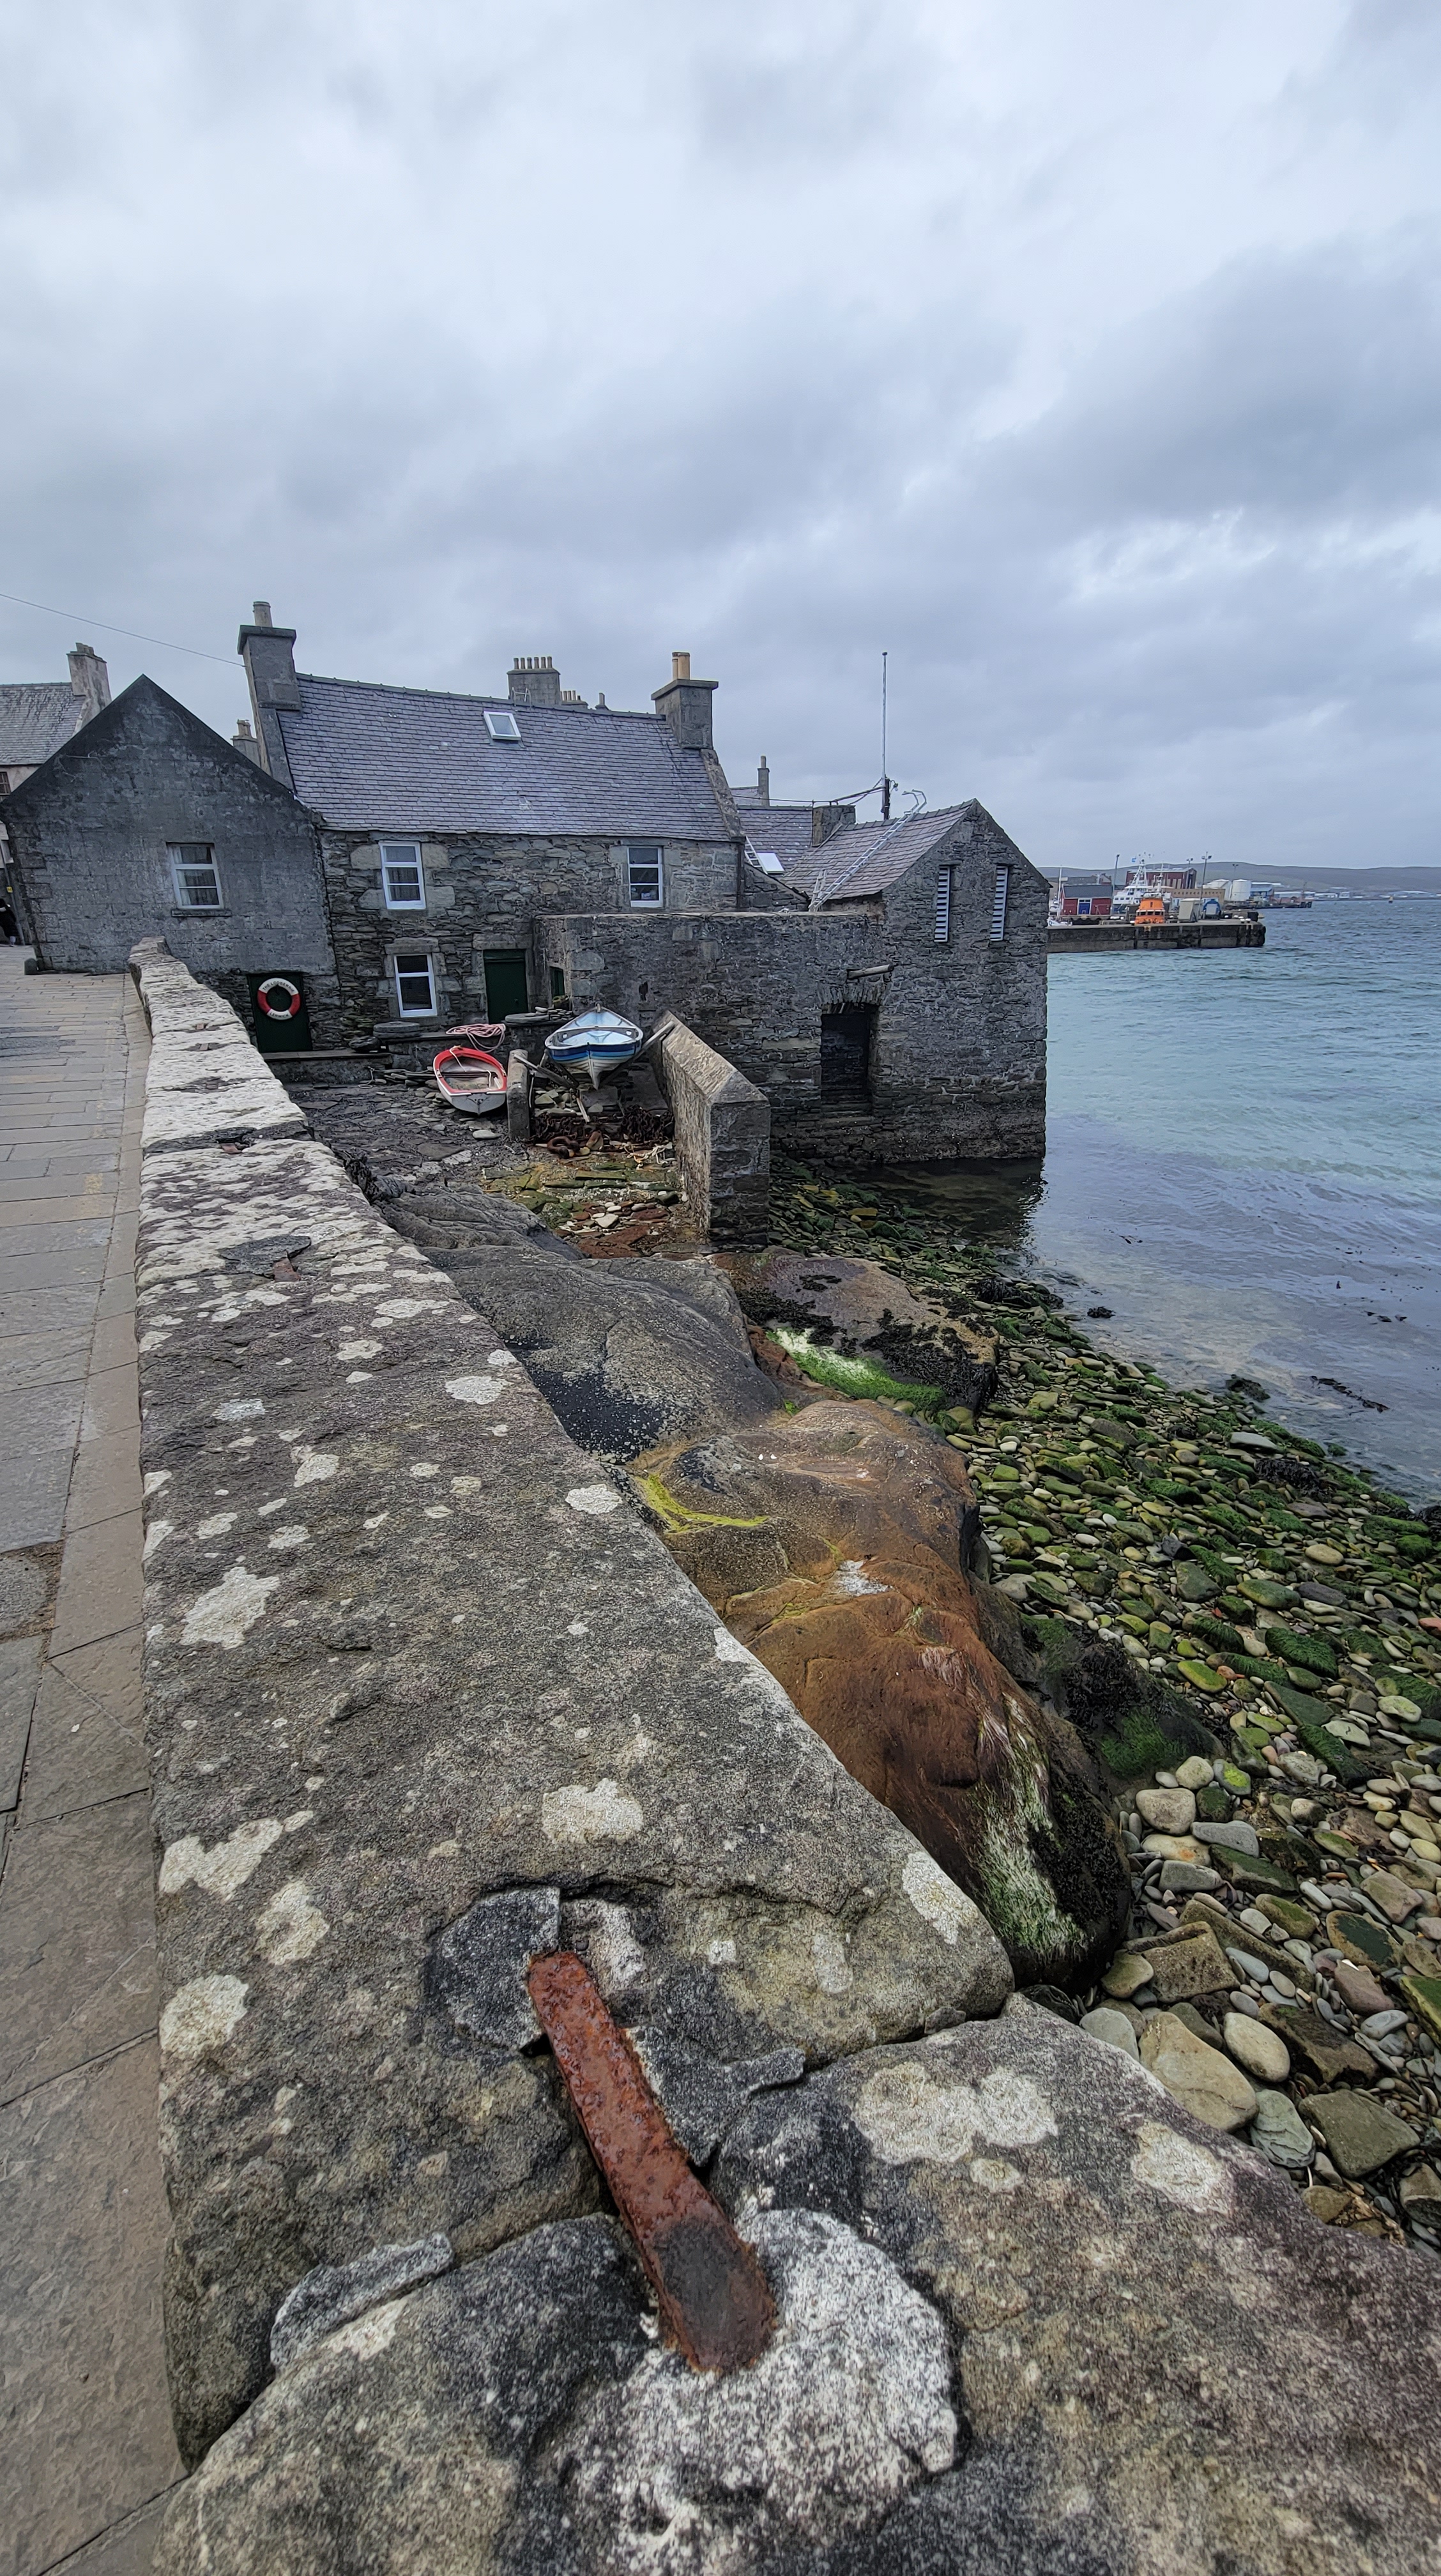 A stone house that lives partially in the sea in Lerwick, Shetland Islands.